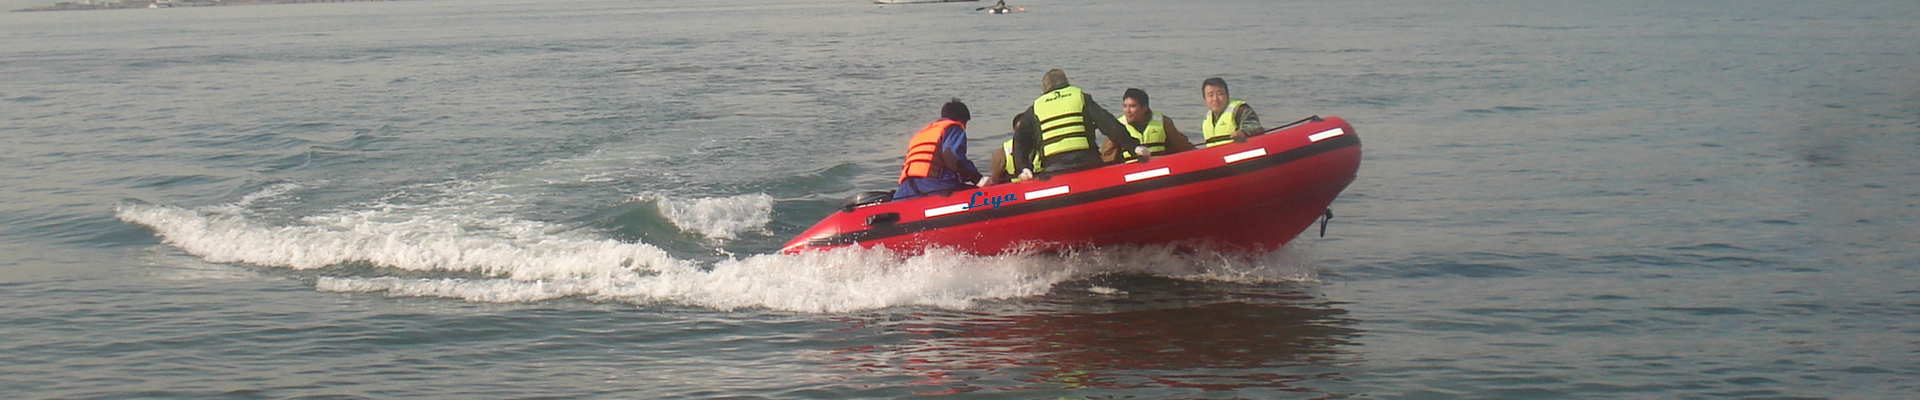 rescue inflatable boat 